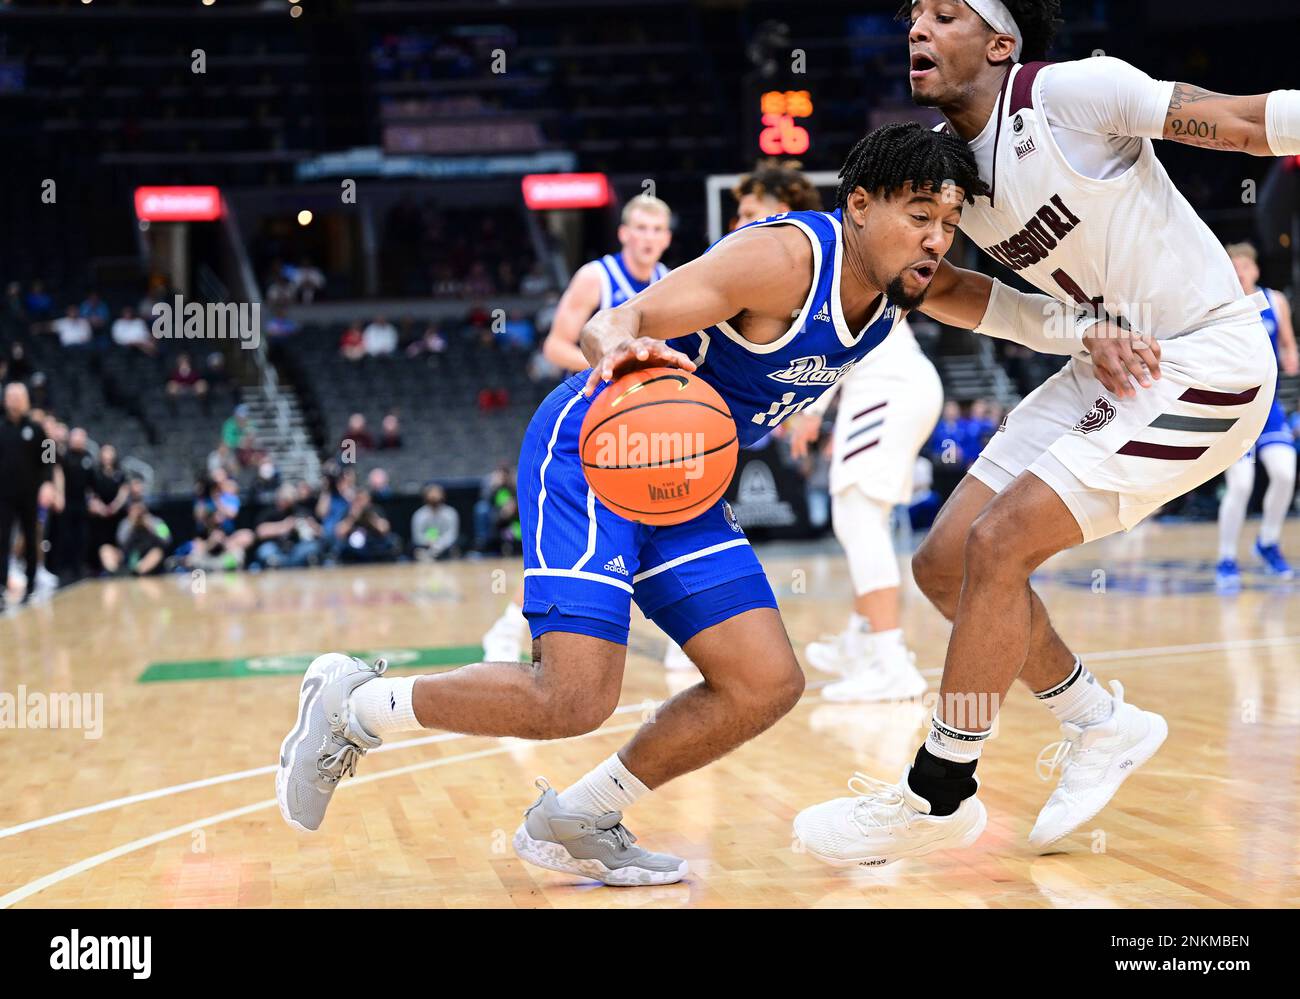 ST. LOUIS, MO - MARCH 05: Drake Bulldogs guard Okay Djamgouz (10) drives to  the basket in the first half during a college basketball game between the  Missouri State Bears and the